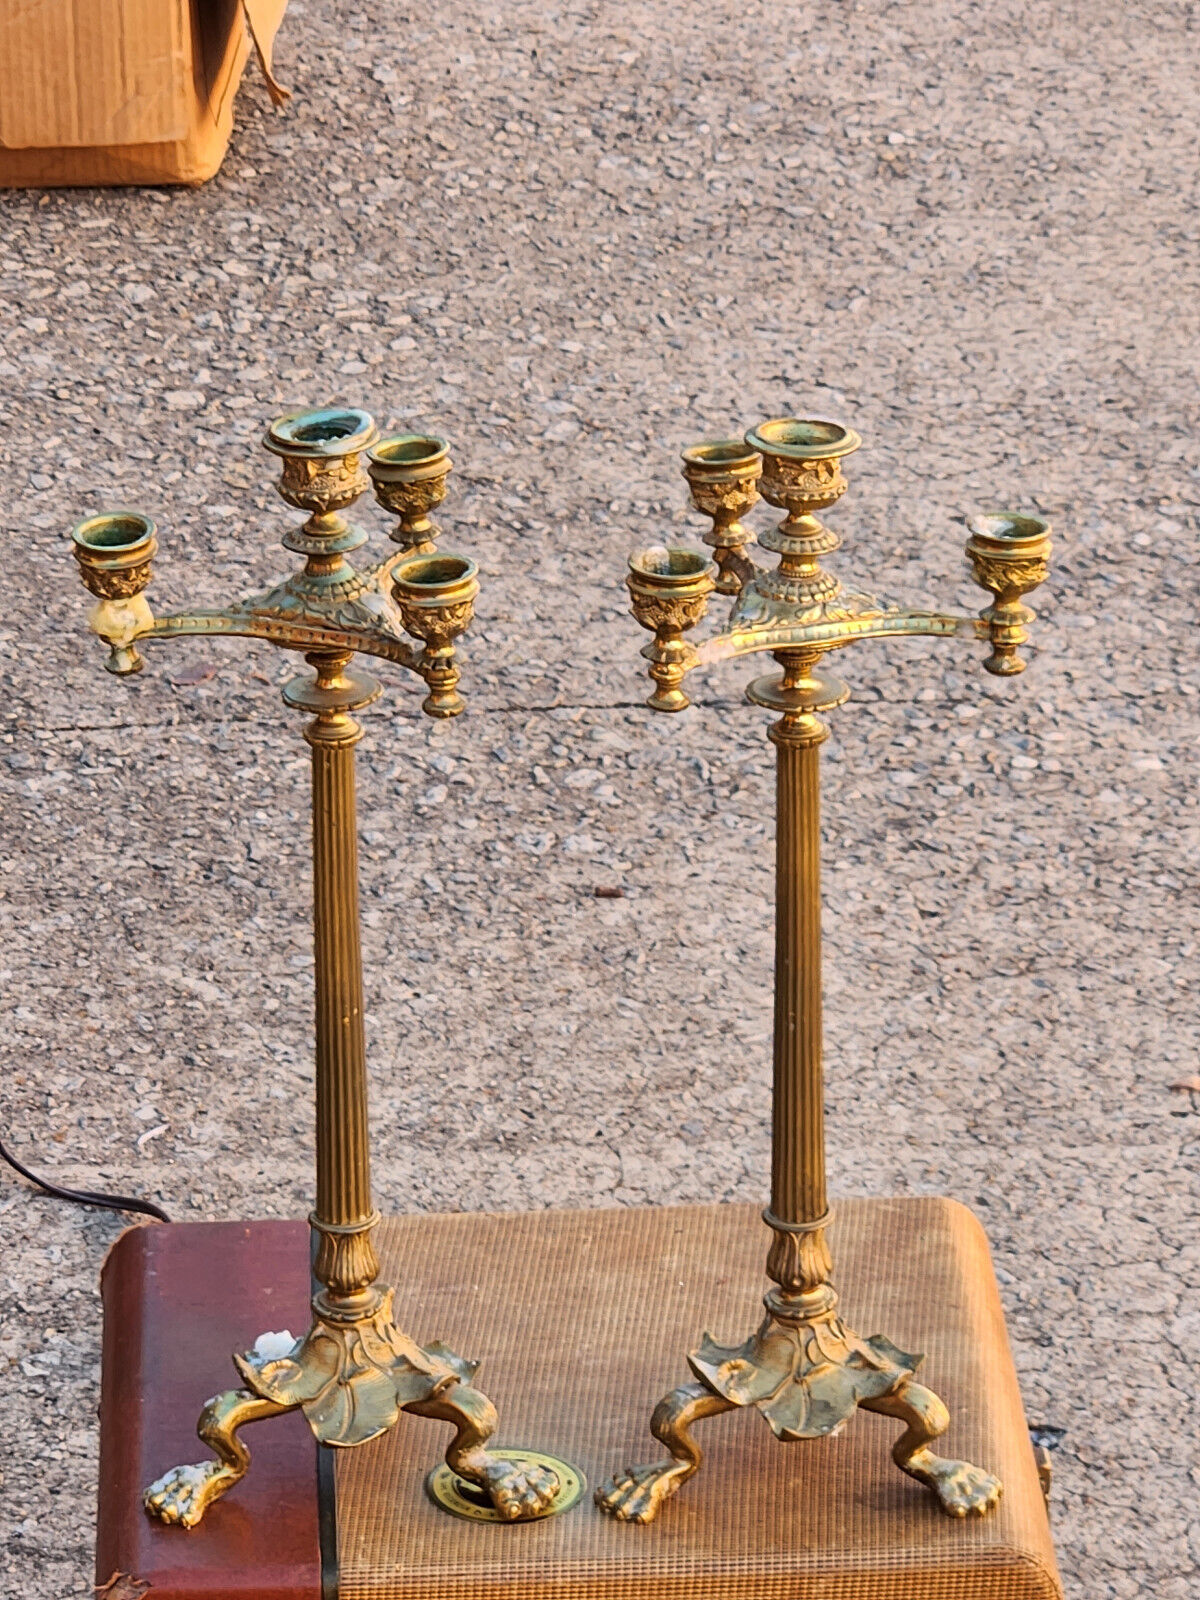 Pair of Antique French Brass Candleholders 19th Century-4 Candle Holder